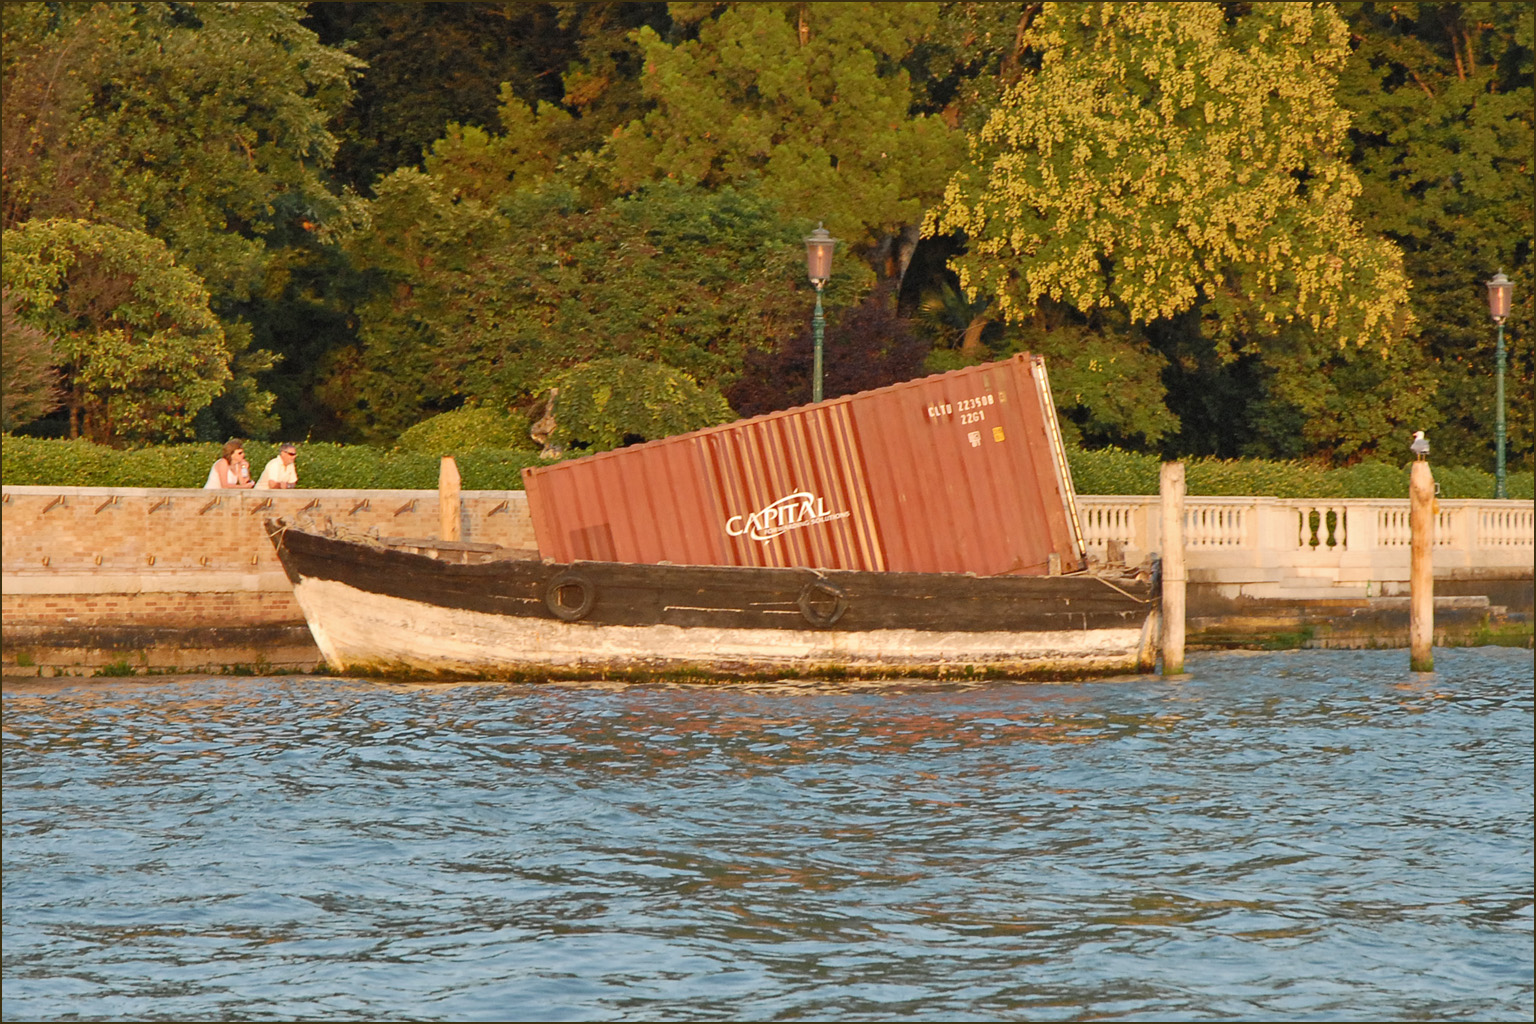 a barge that is sitting in the water with trees in the background